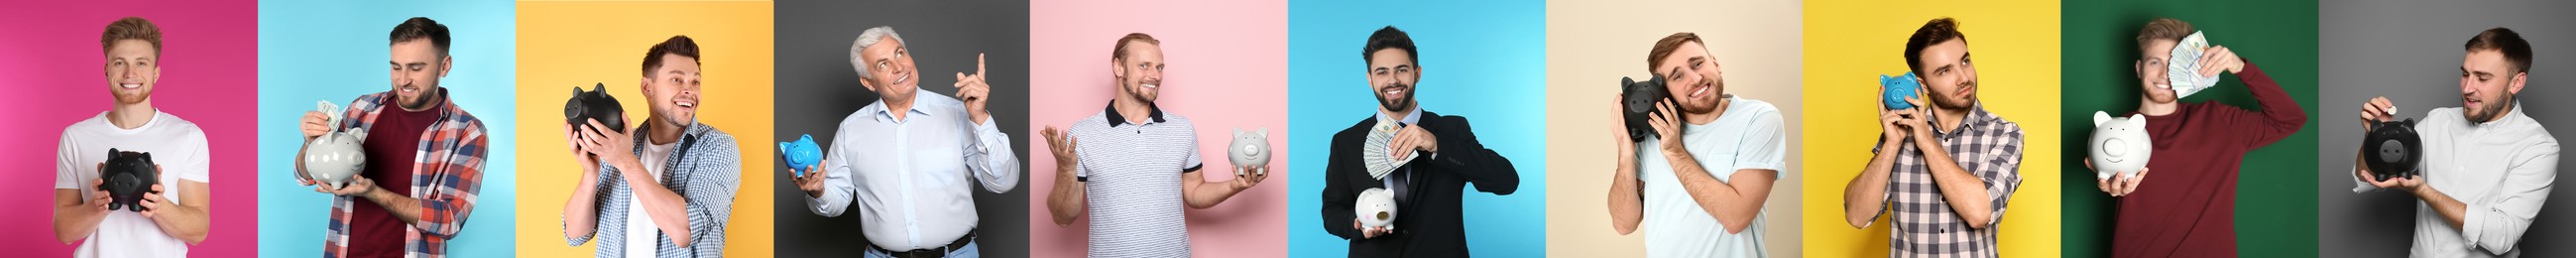 Collage with photos of men holding piggy banks on different color backgrounds. Banner design